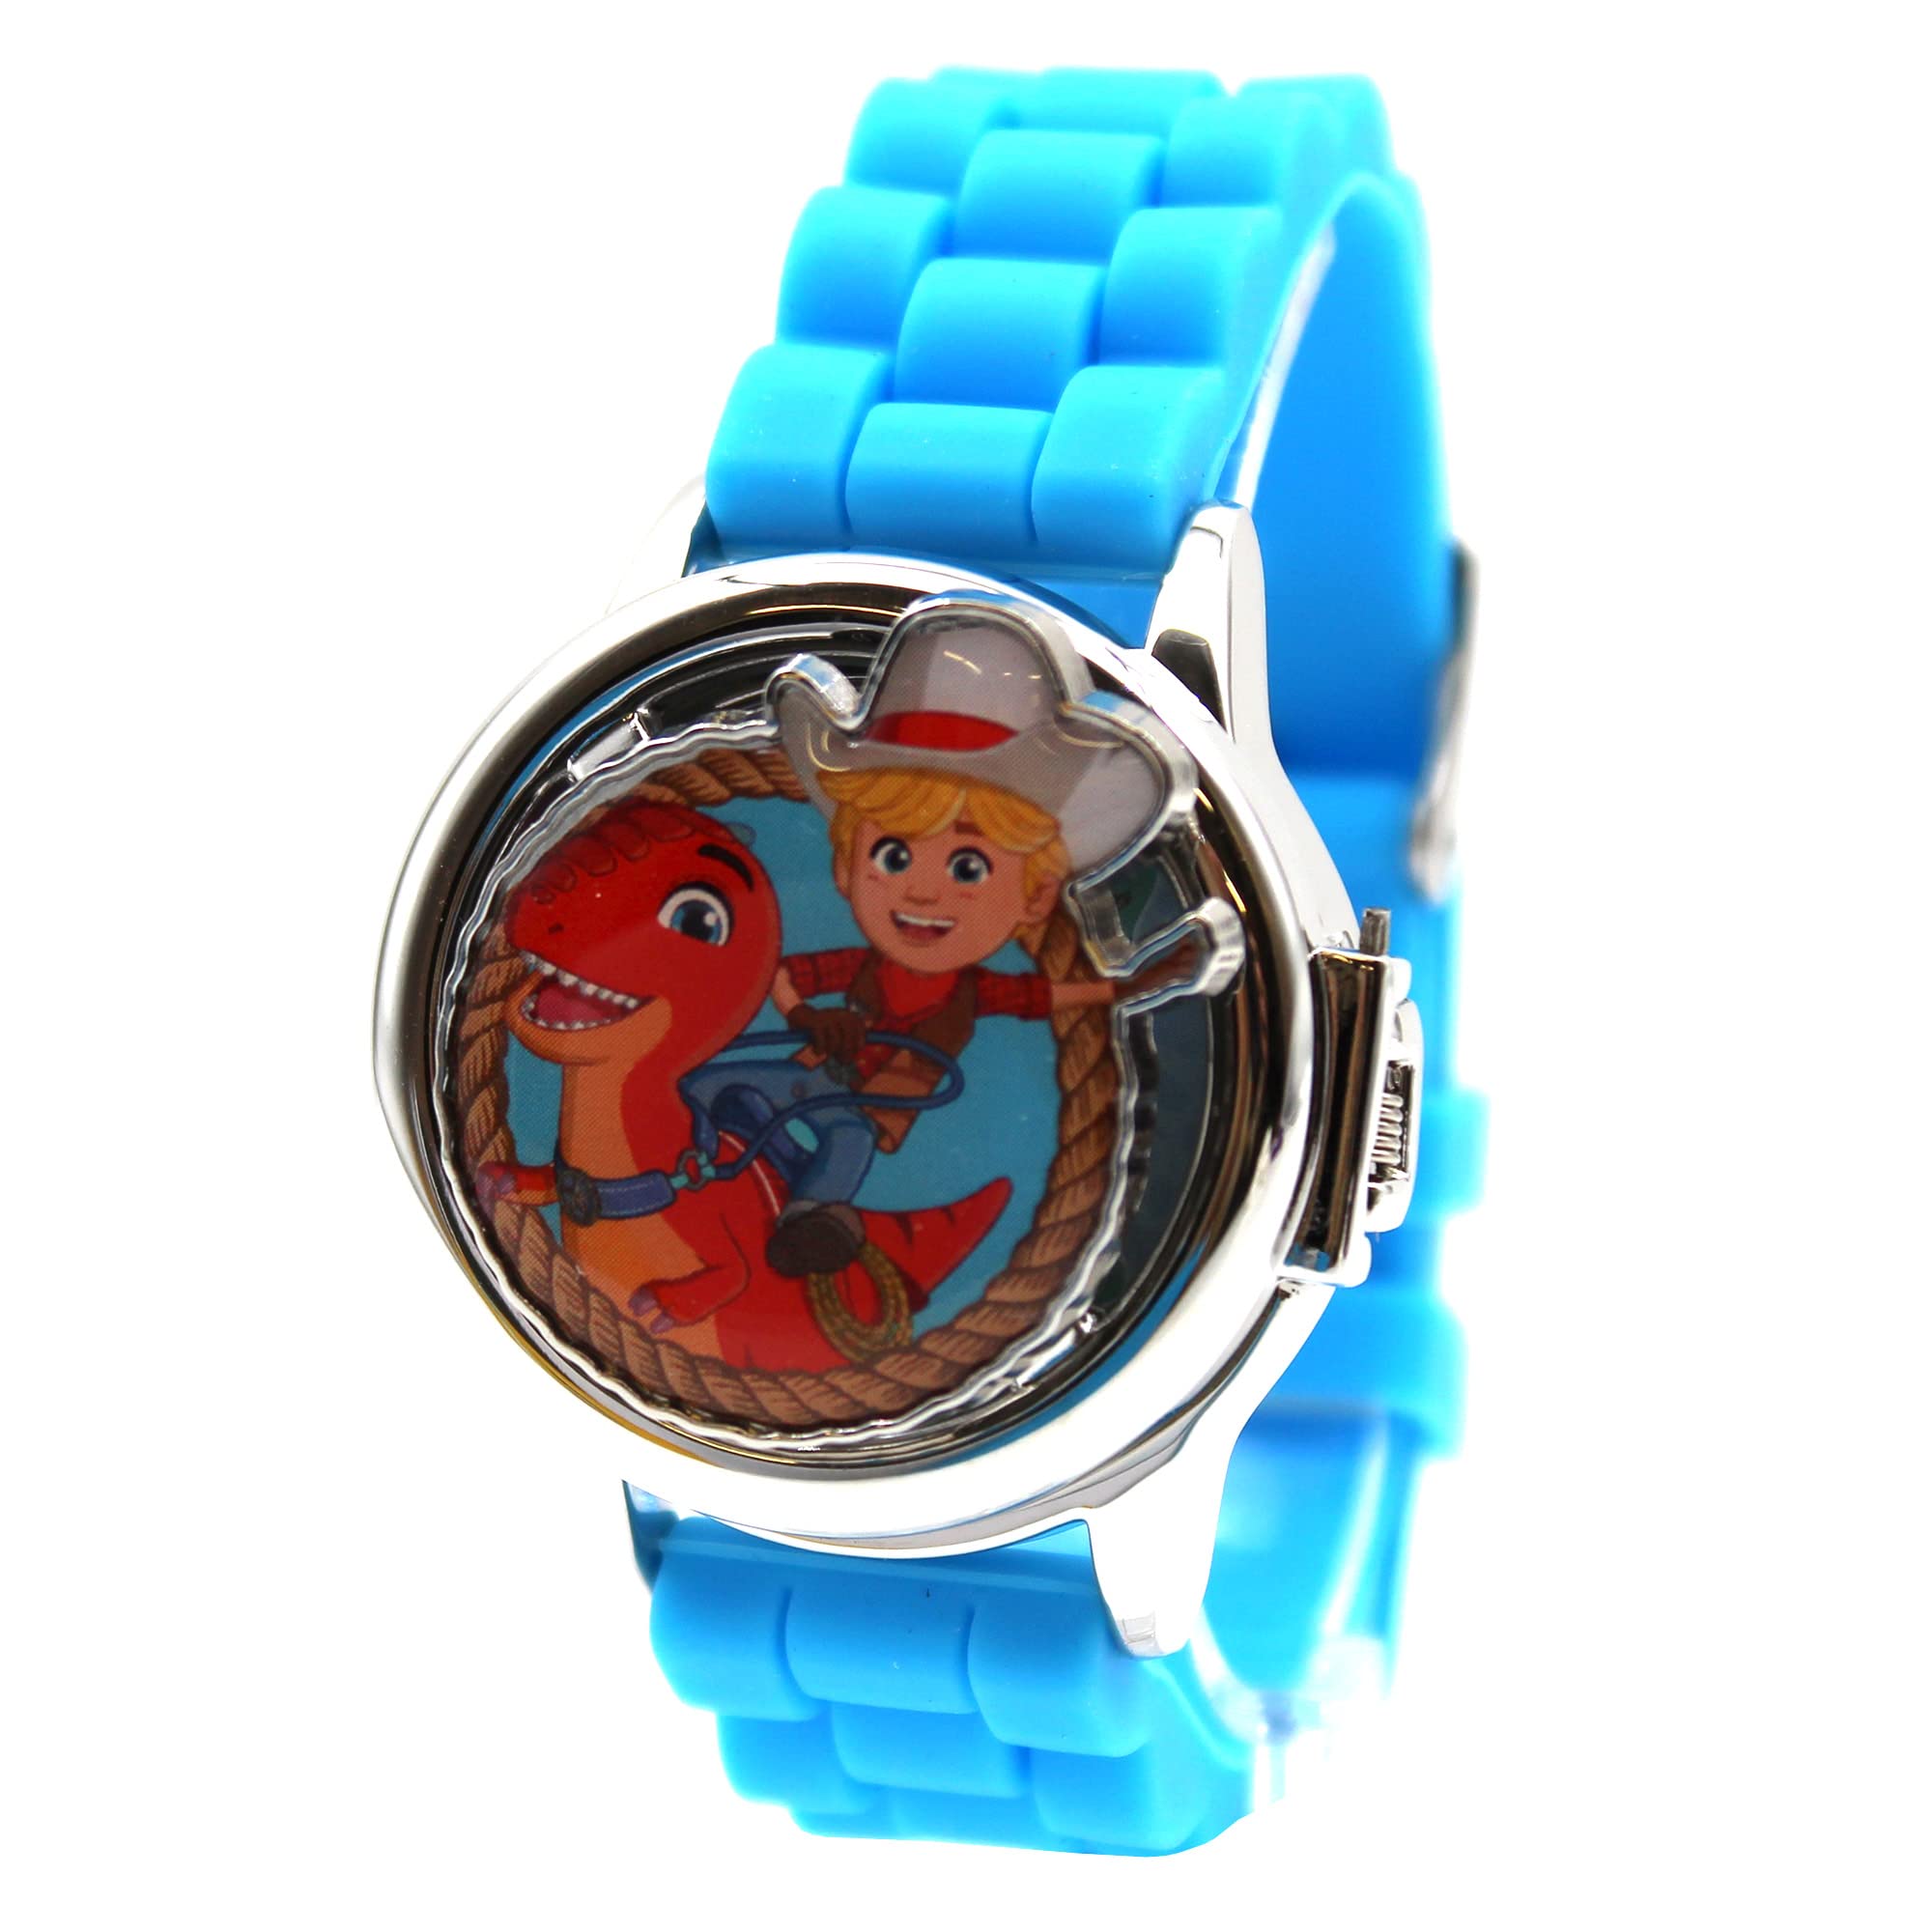 Accutime Kids Dino Ranch Digital LCD Quartz Childrens Wrist Watch for Boys, Girls, Toddlers with Multicolor Face, Blue Strap and Spinner Cover (Model: DNR4000AZ)